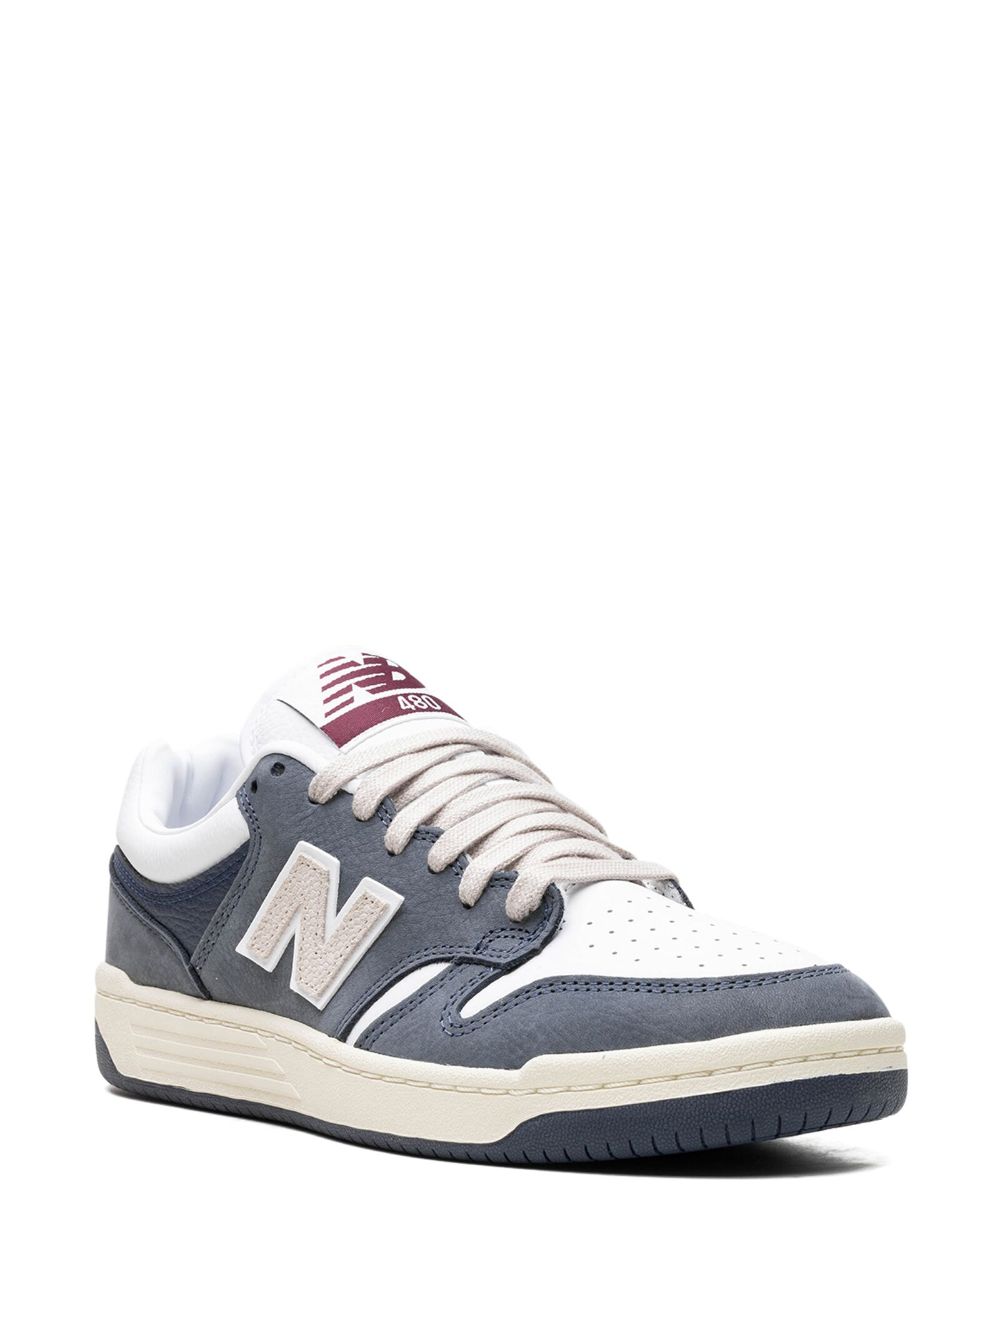 Image 2 of New Balance Numeric 480 "Blue/White" sneakers